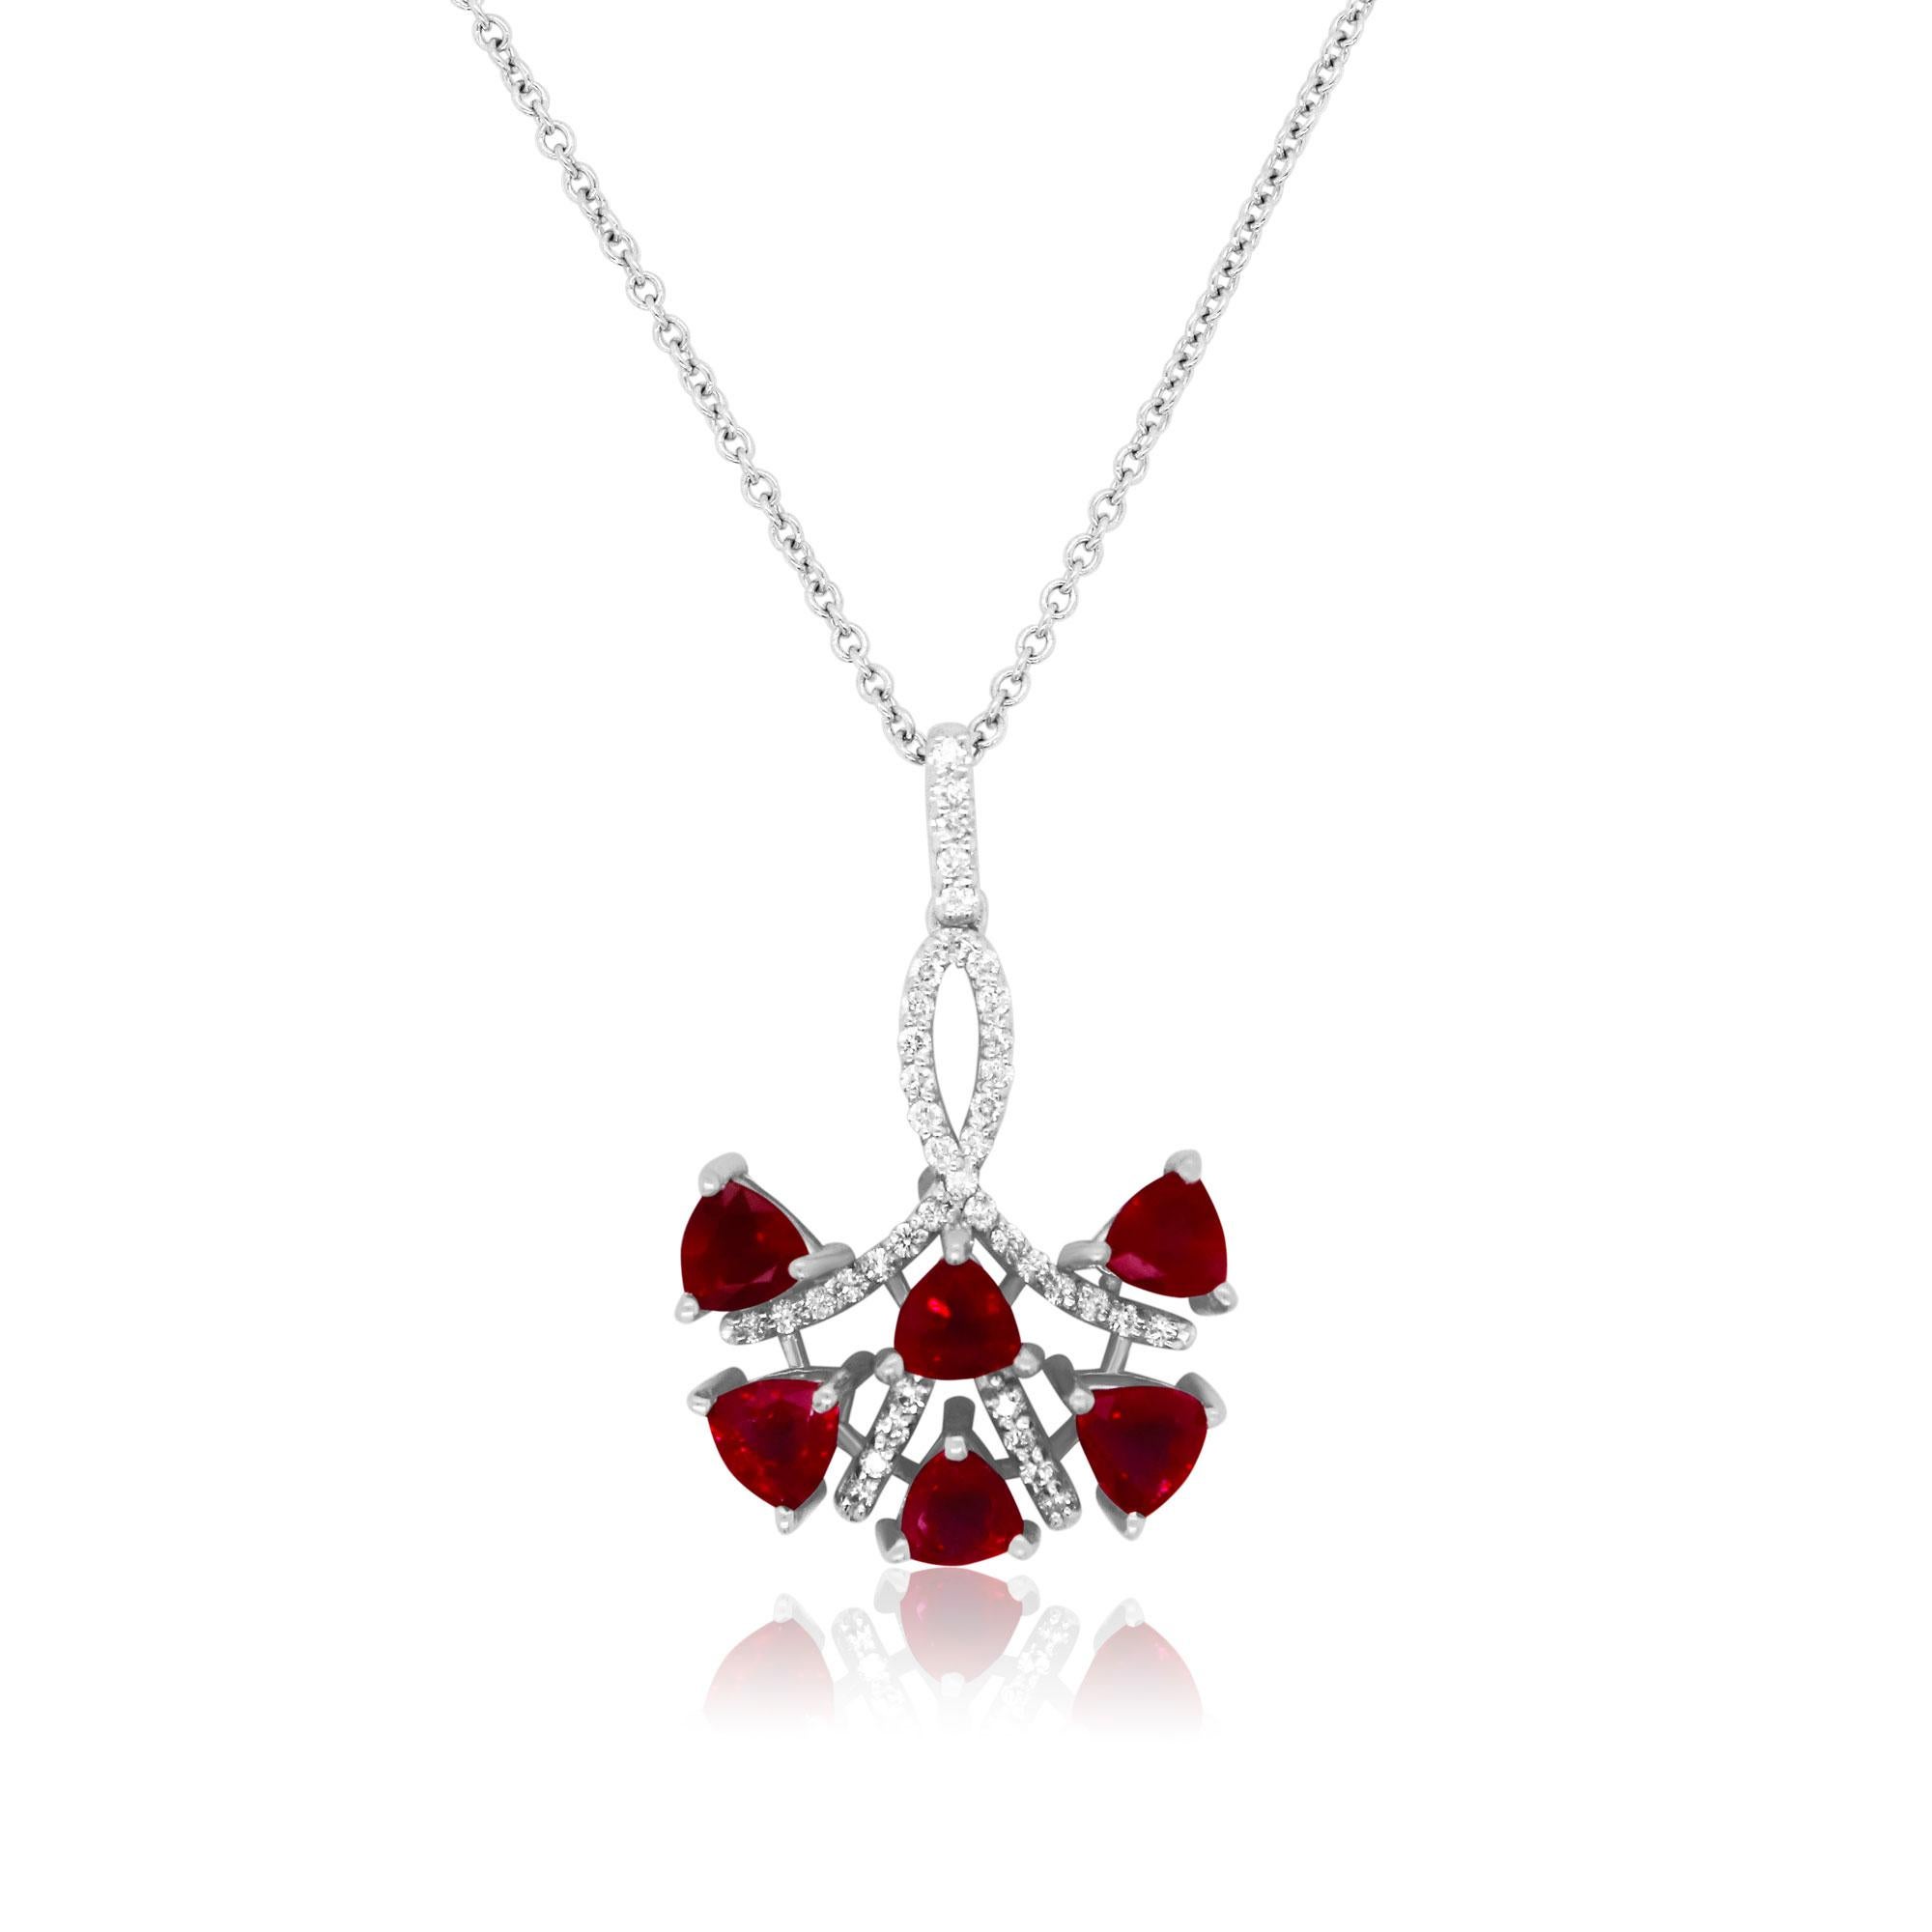 Material: 14k White Gold 
Center Stone Details: 6 Trillion Shaped Rubies at 2.35 Carats Total Weight- Measuring 4 x 4.5 mm
Diamond Details: 41 Brilliant White Diamonds at .20 Carats - Clarity: SI / Color: H-I

Fine one-of-a-kind craftsmanship meets